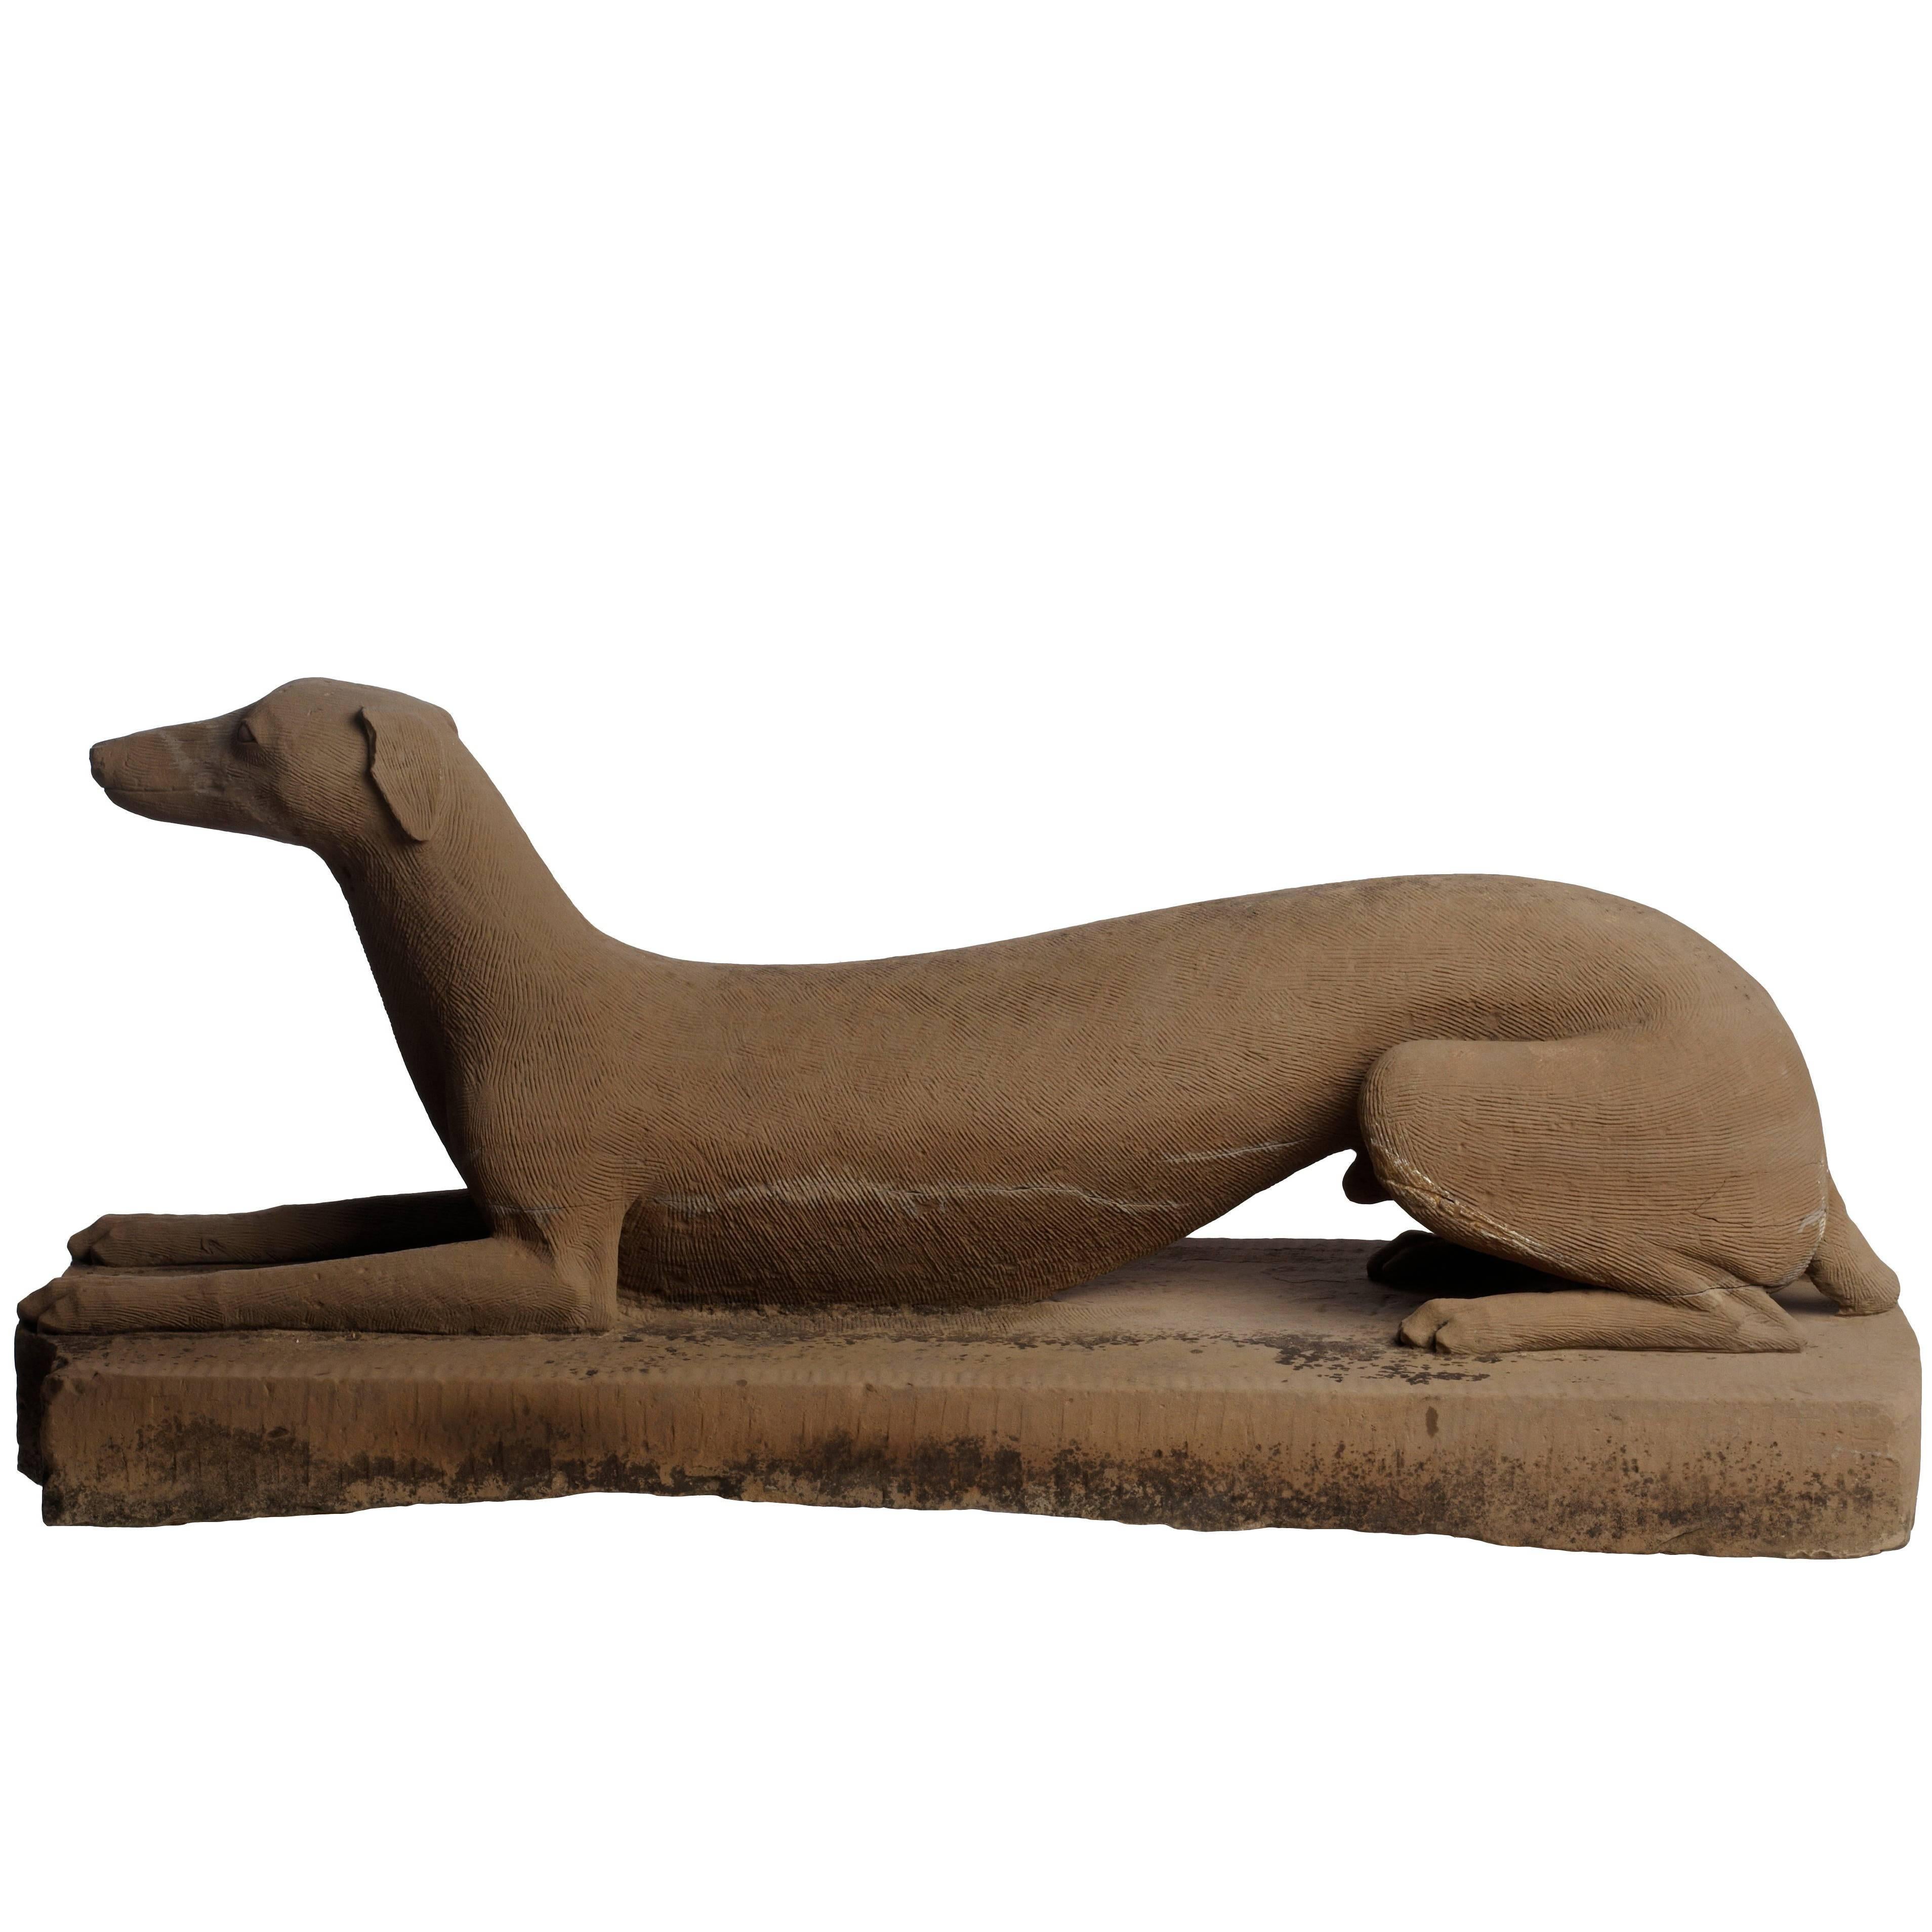 Carved Greyhound Statue For Sale